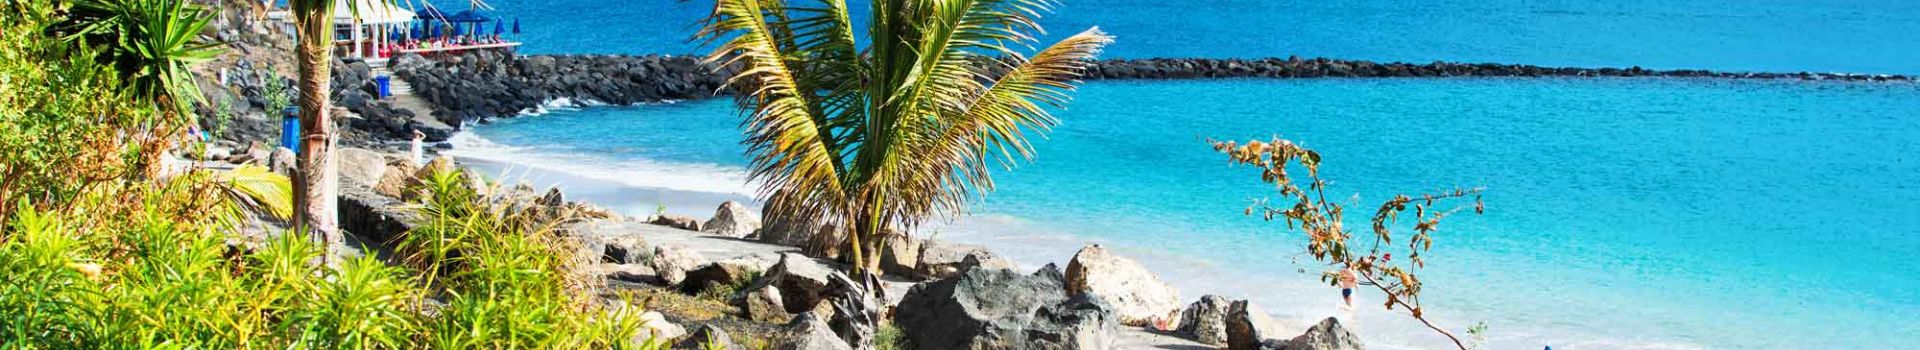 Cheap holidays to Lanzarote from Cork Airport with Cassidy Travel